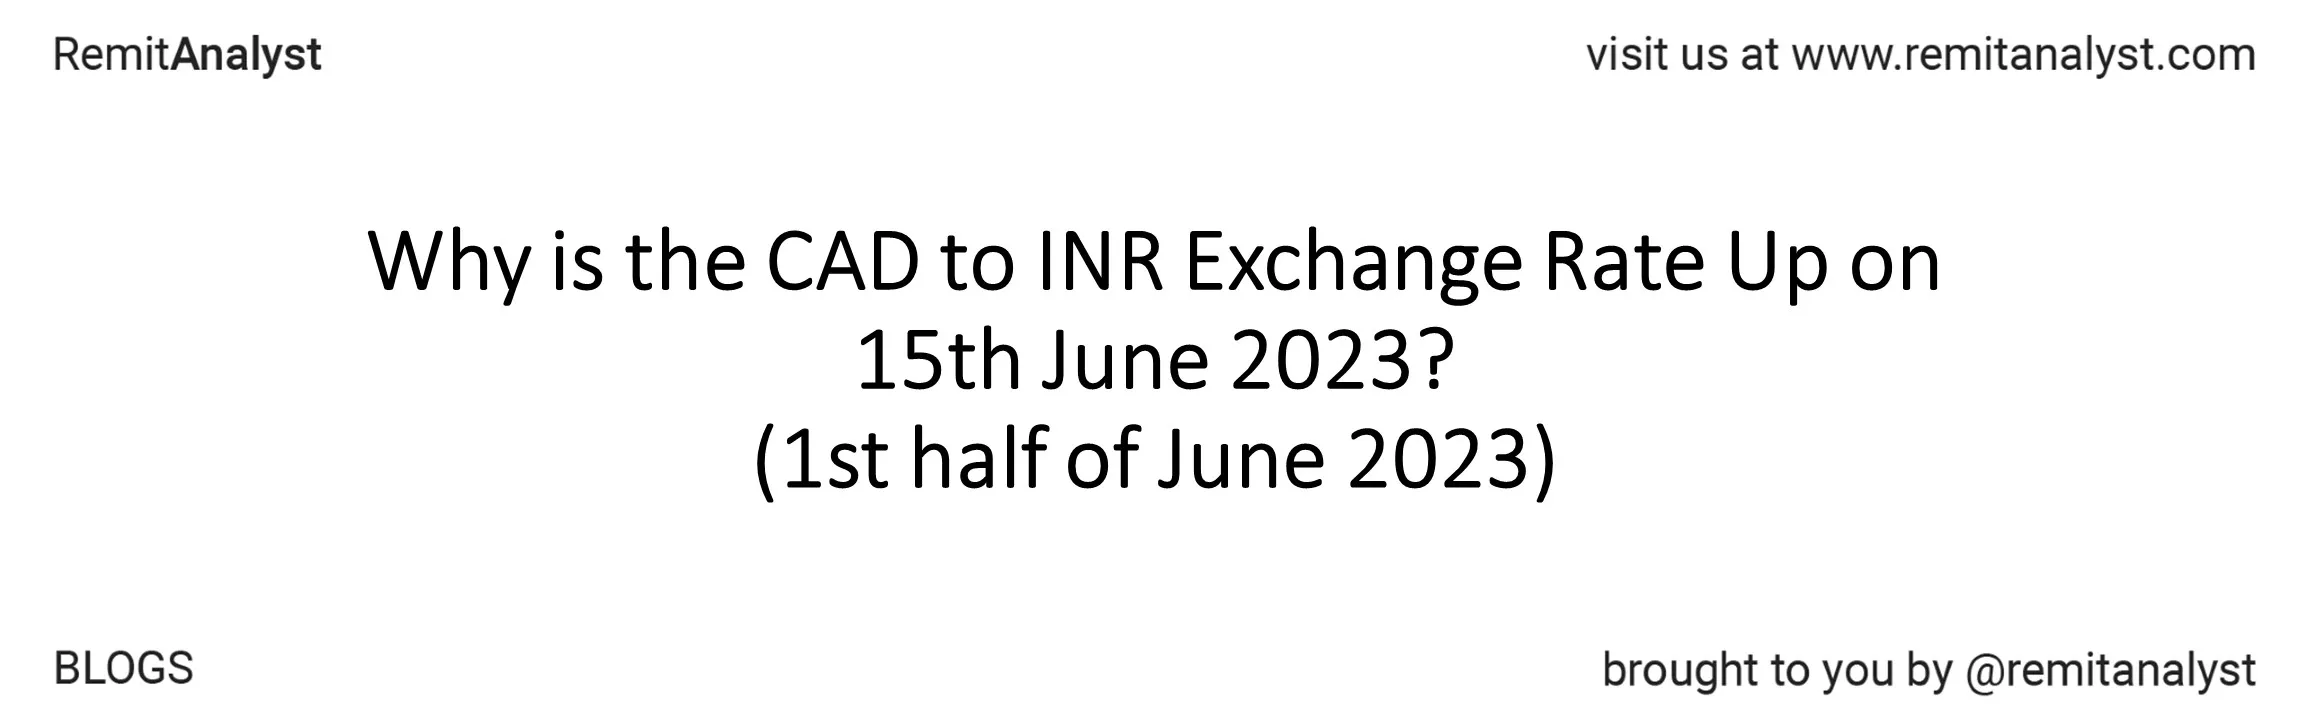 cad-to-inr-exchange-rate-from-1-june-2023-to-15-june-2023-title